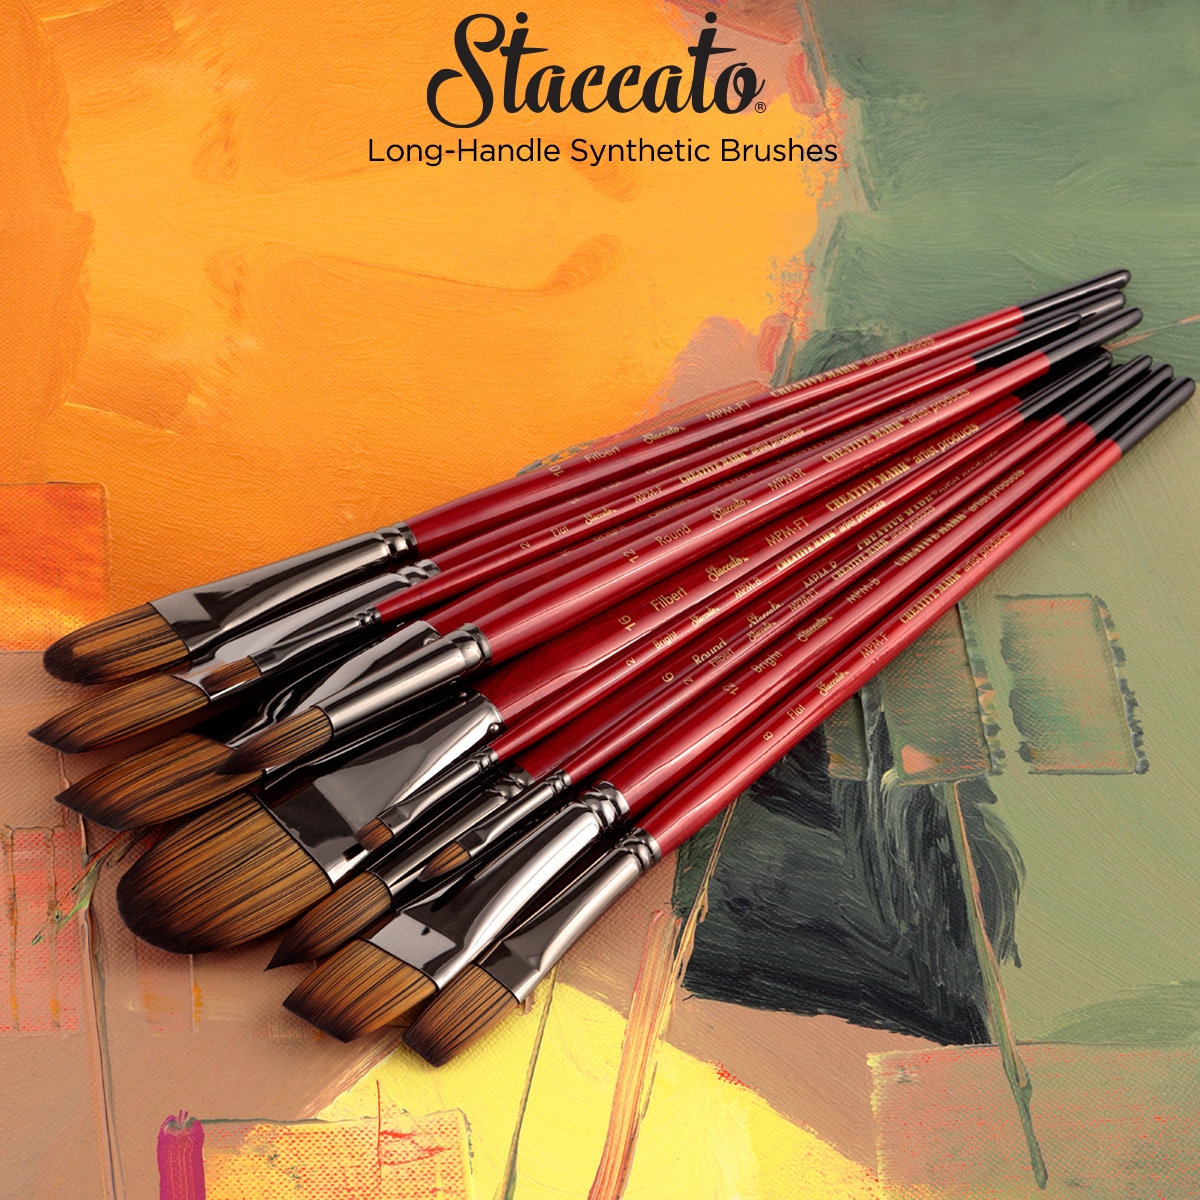 Staccato brushes